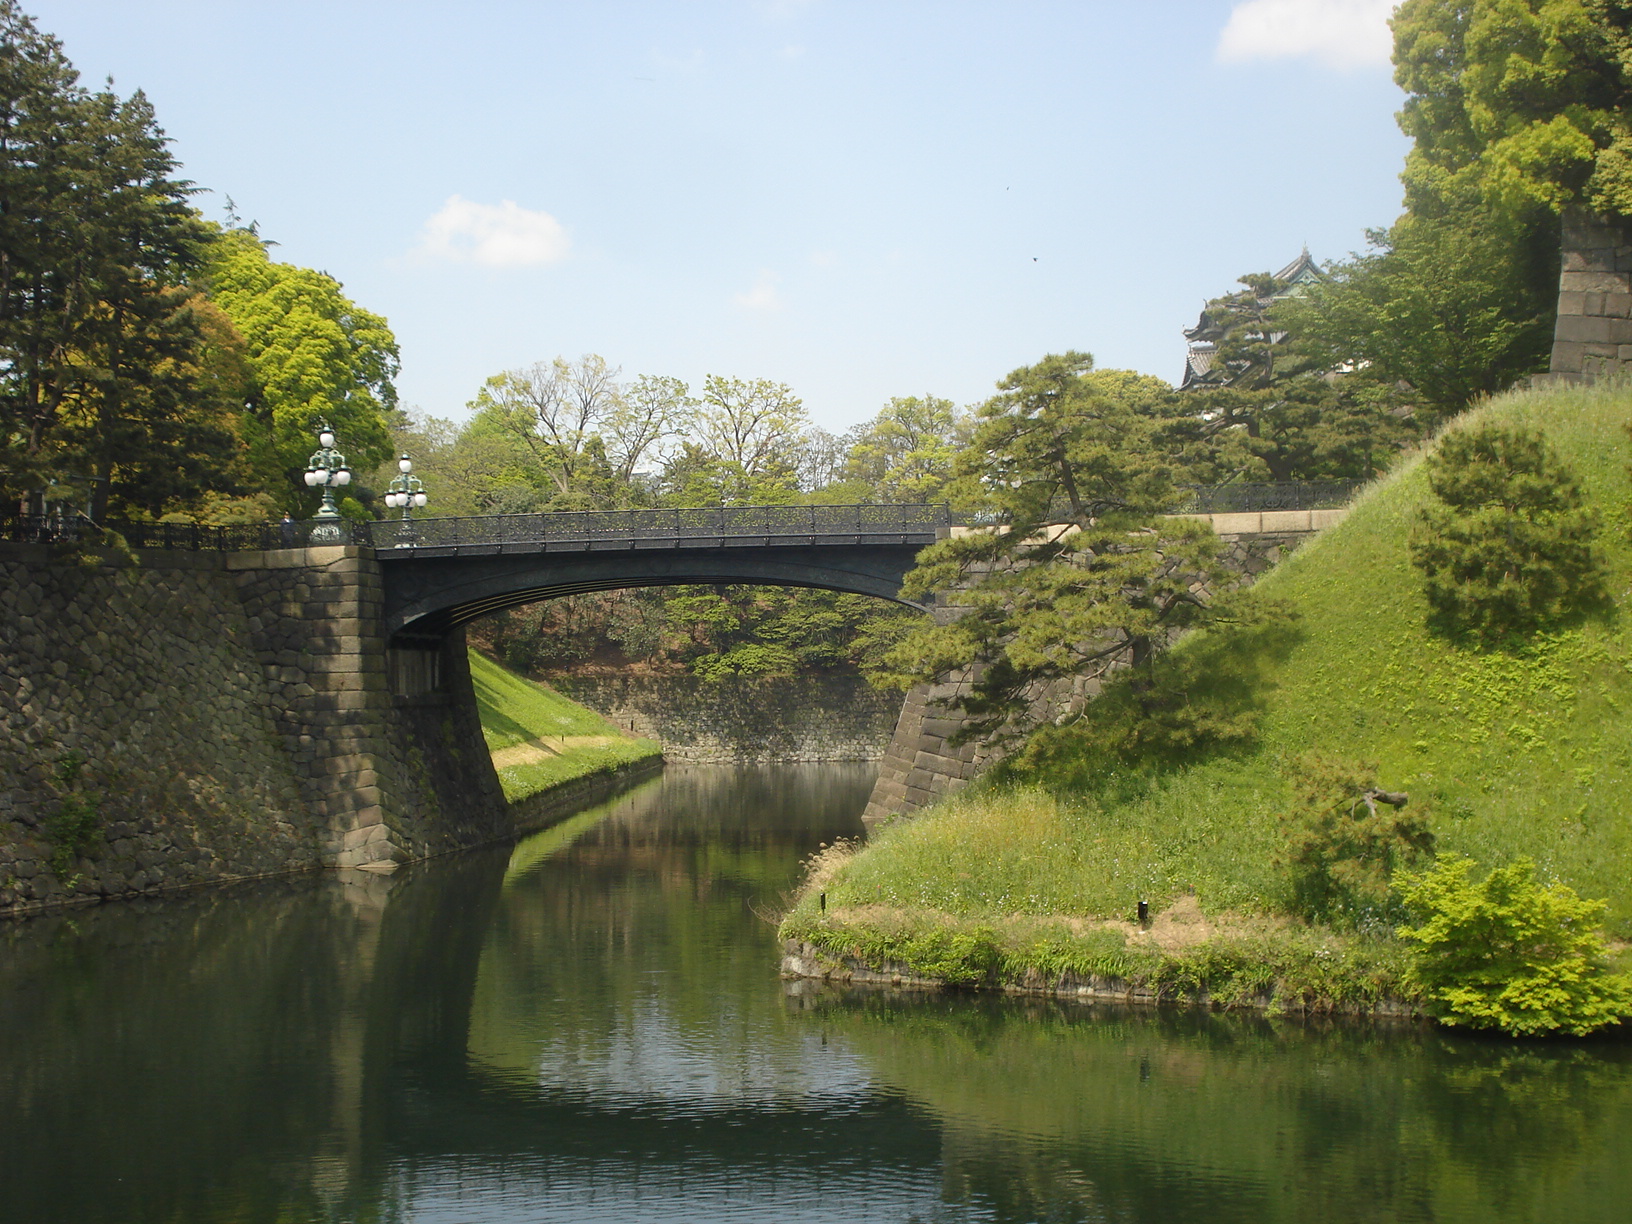 an arched black bridge over a waterway and grassy bank